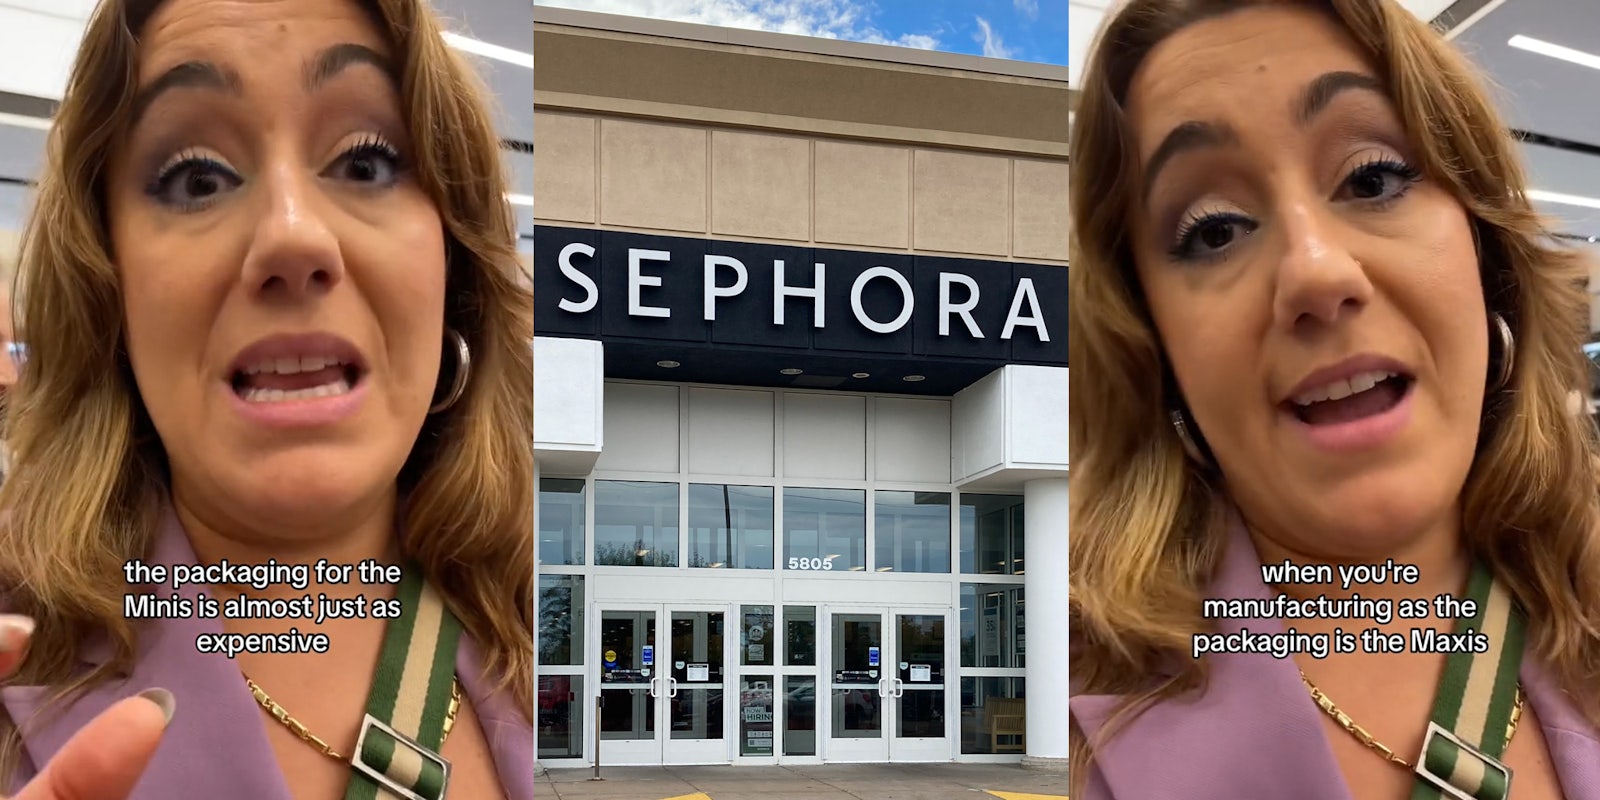 Sephora customer speaking with caption 'the packaging for the Minis is almost just as expensive' (l) Sephora building with sign (c) Sephora customer speaking with caption 'when you're manufacturing as the packaging for the Maxis' (r)